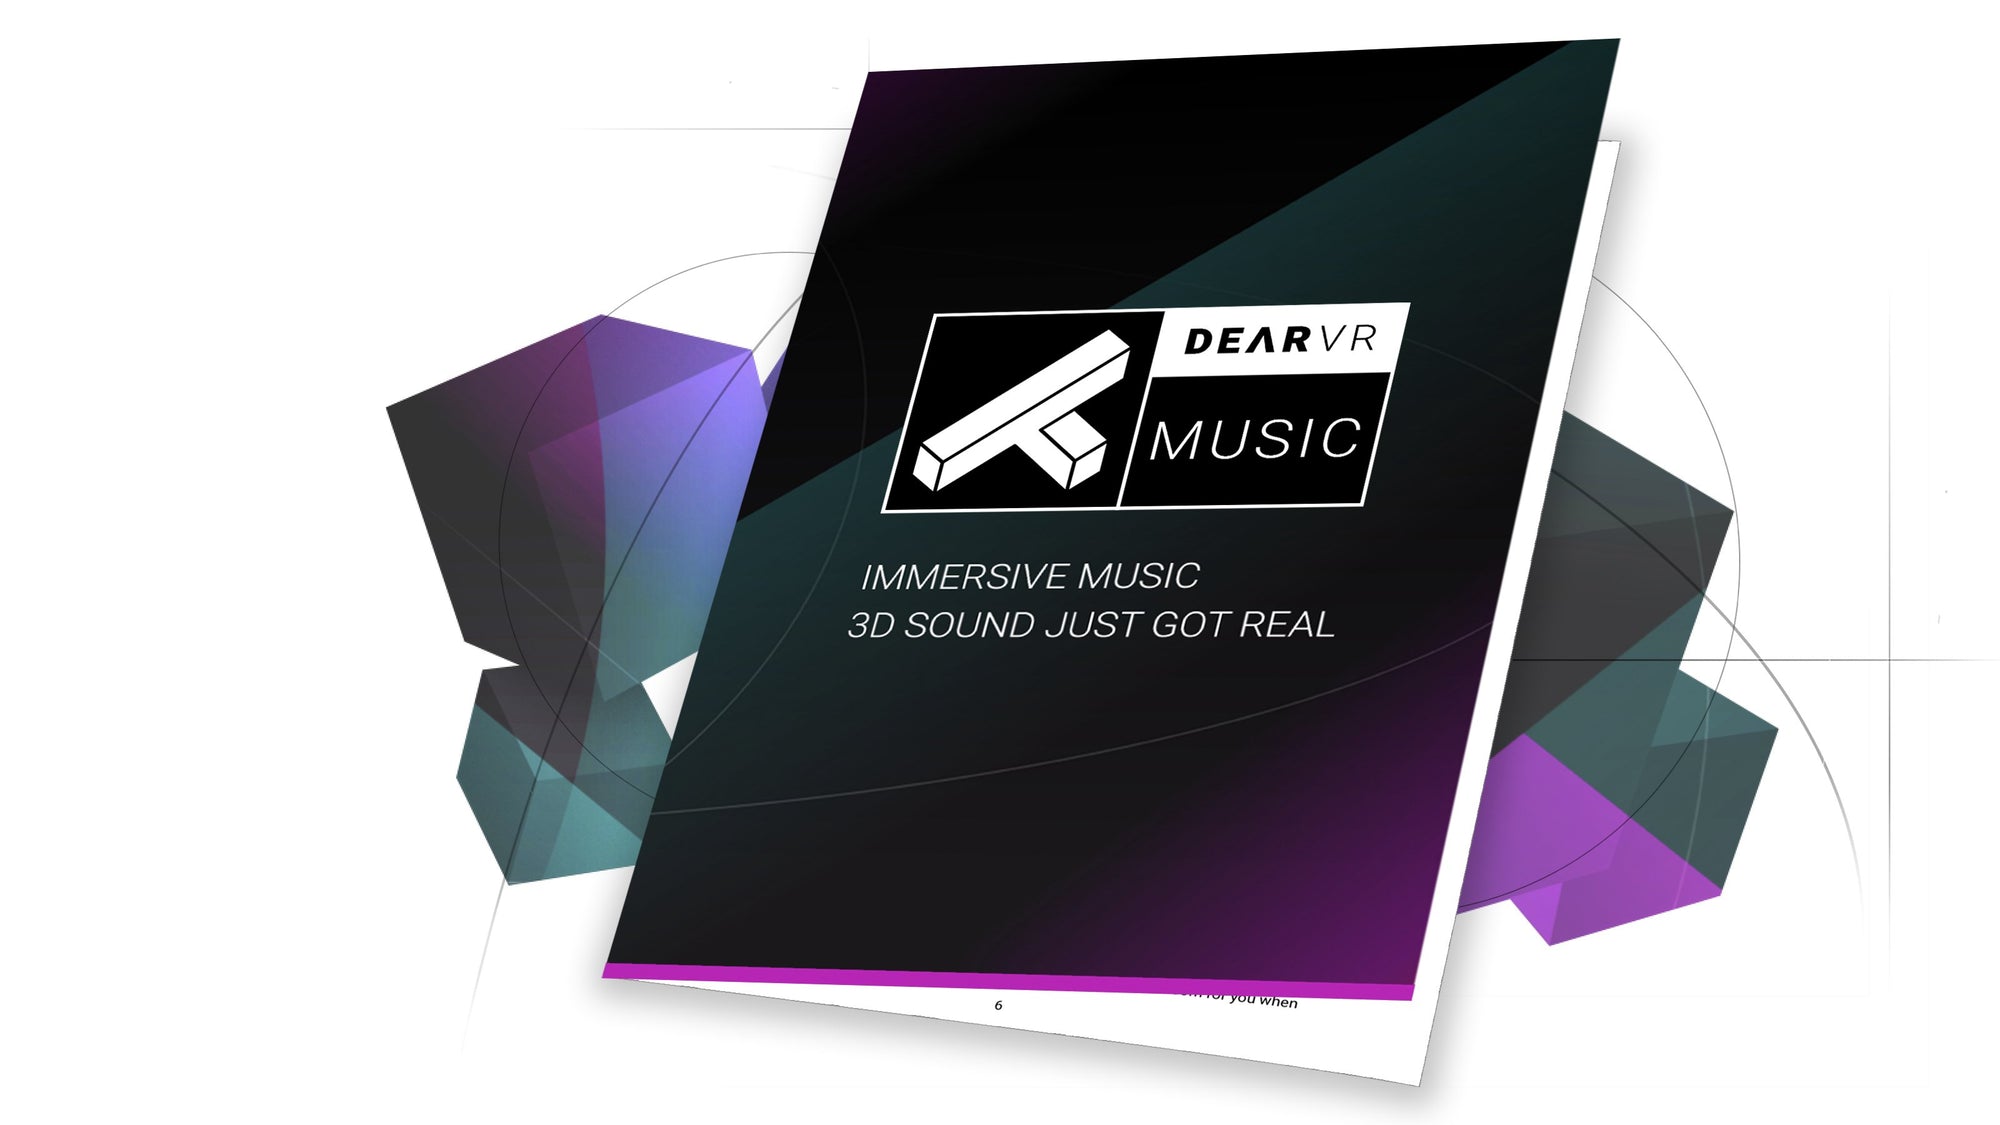 Download the dearVR MUSIC manual to get detailed insights